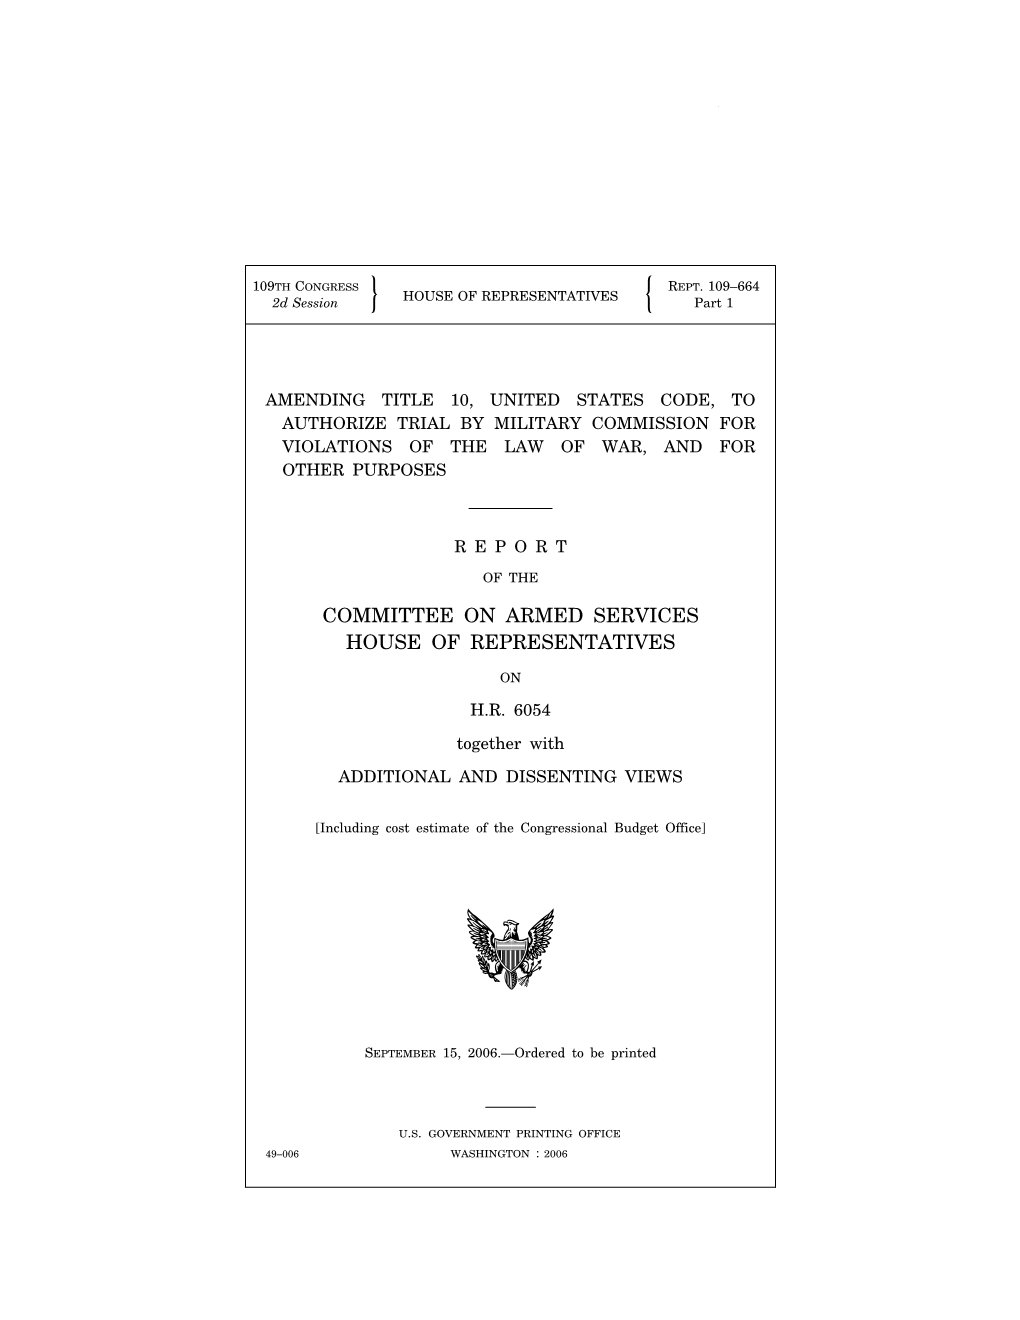 Committee on Armed Services House of Representatives